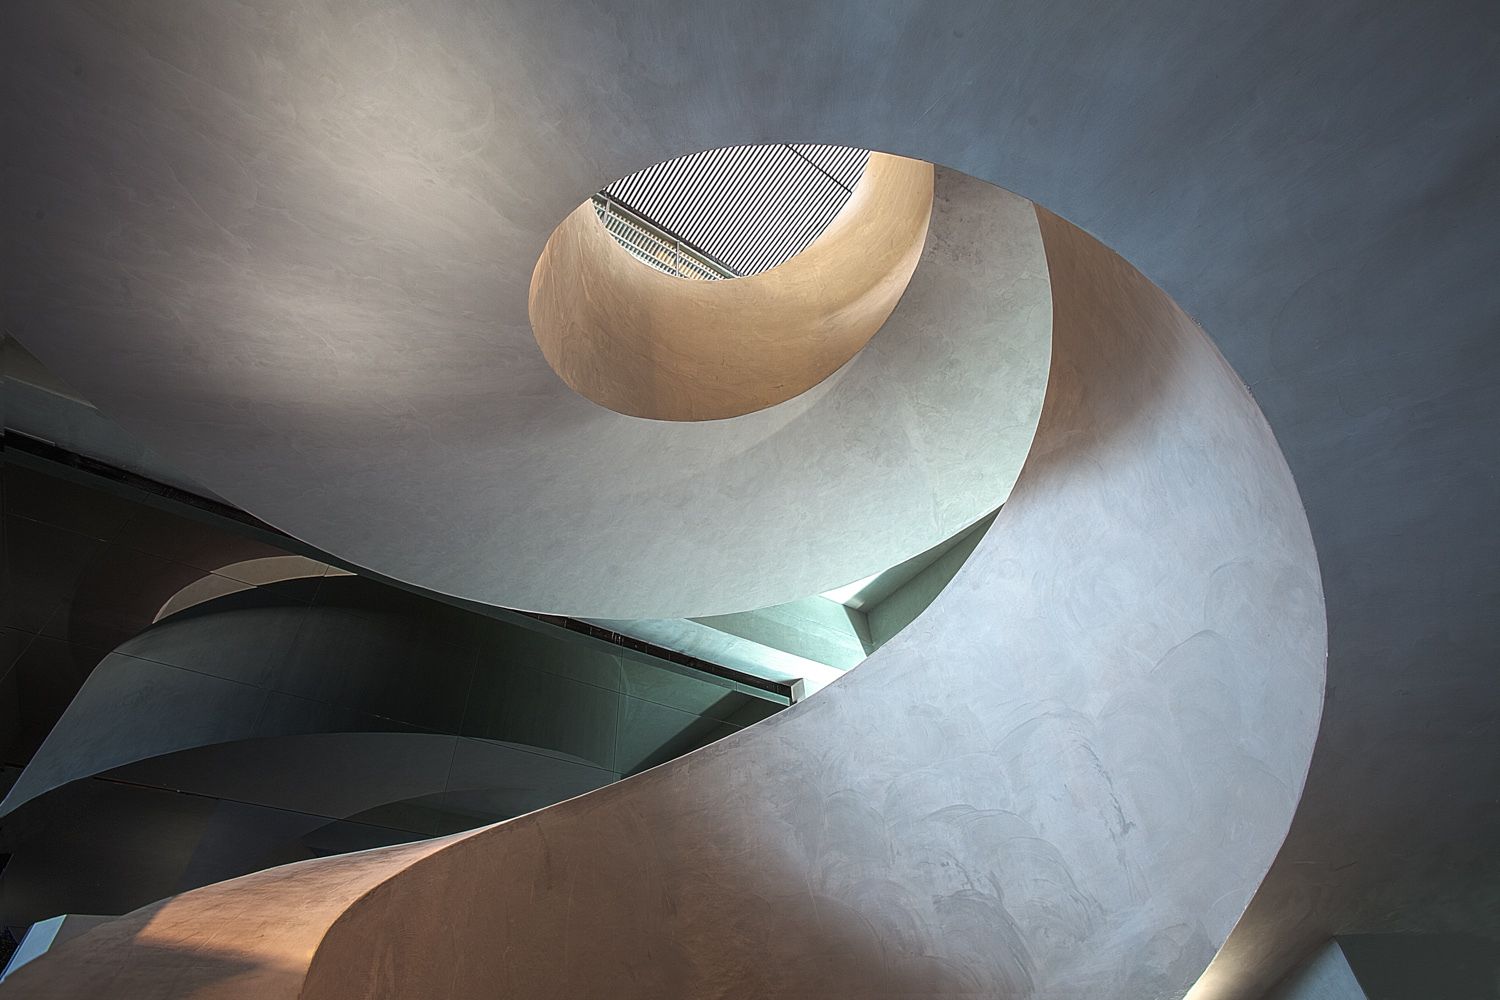 Stairwell in Masdar City by Foster + Partners